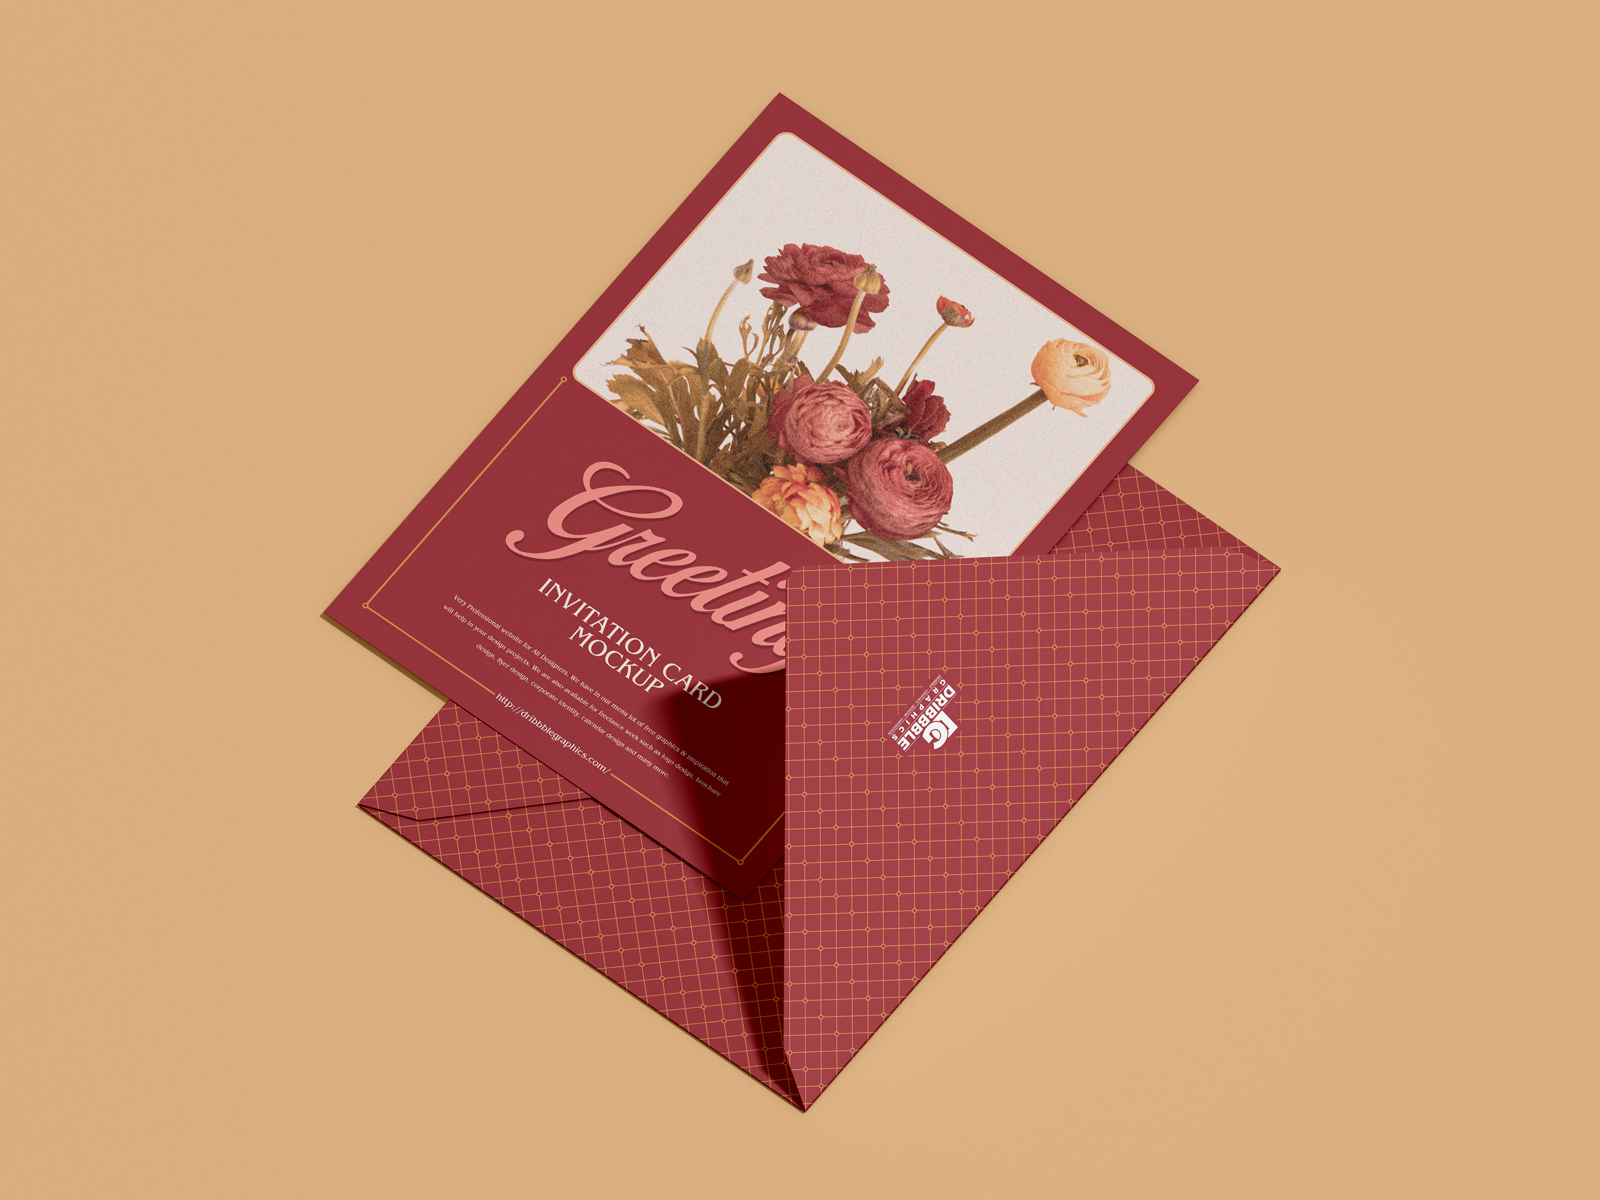 Download Free 5x7 Greeting Invitation Card Mockup By Jessica Elle On Dribbble